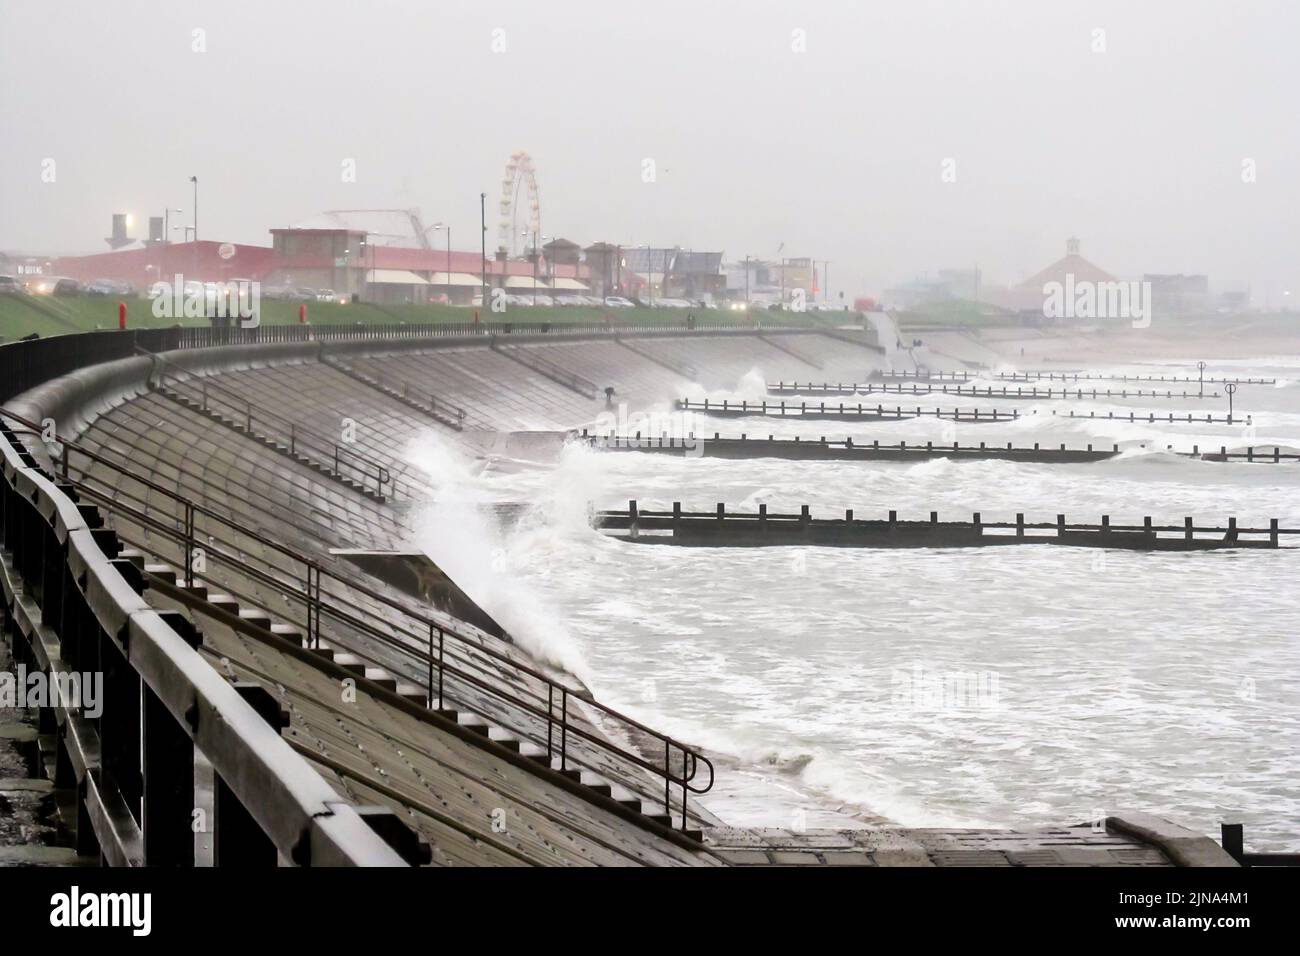 The Turbulent North Sea along the coast of Aberdeen, Scotland, with a fair in the distant in the mist. Stock Photo